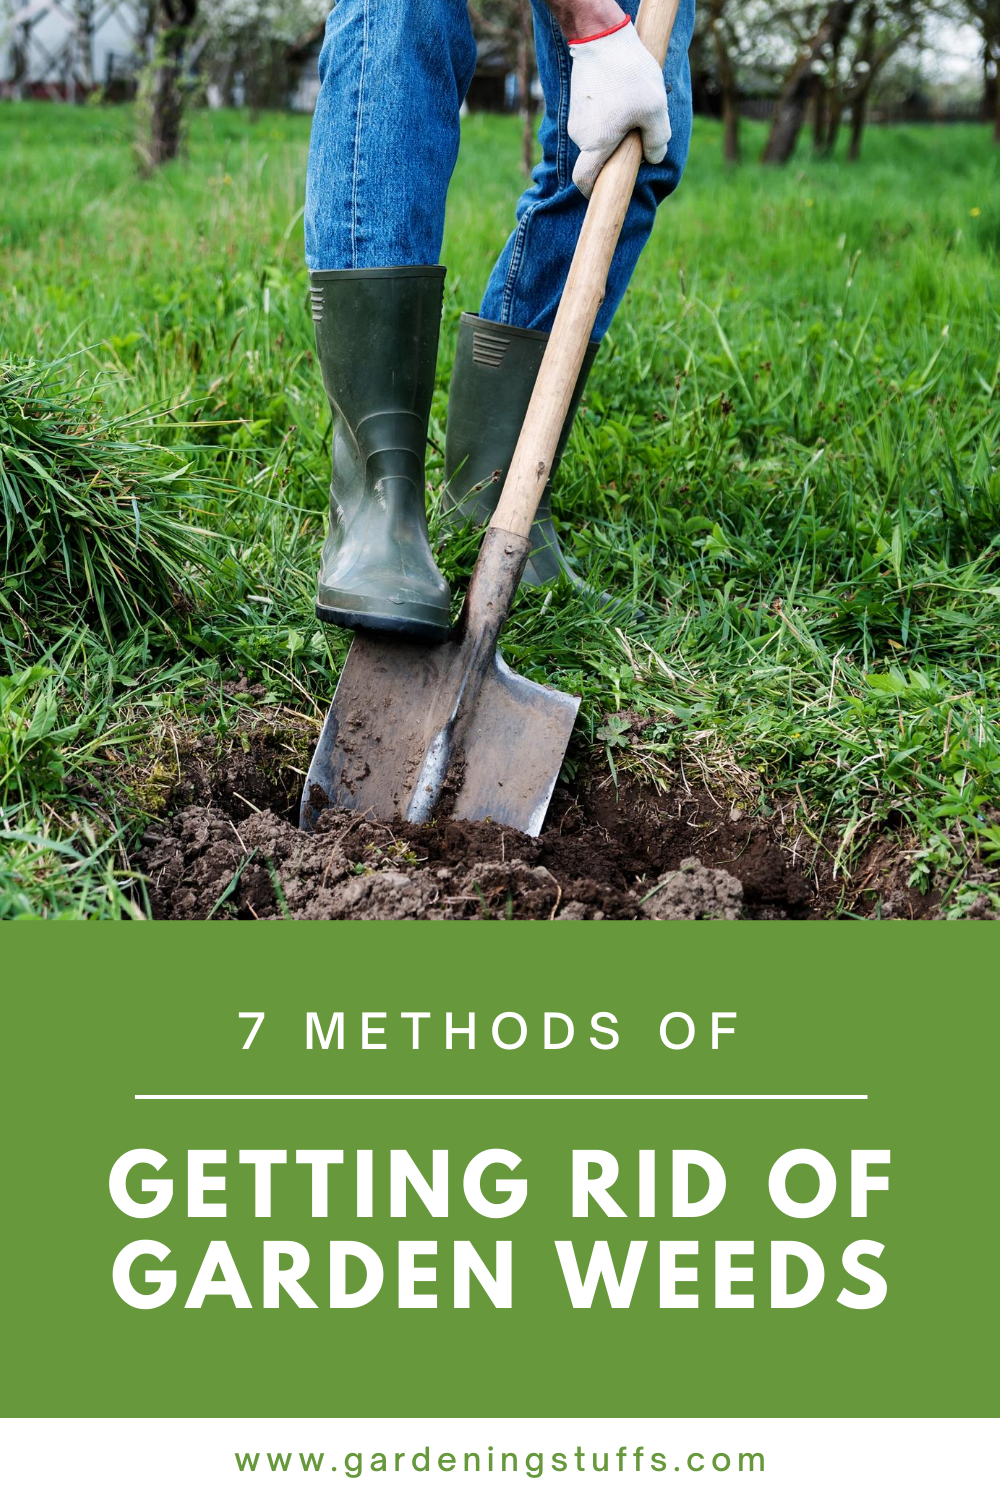 Get rid of unwanted garden weeds once and for all without the fuss. Find out the best 7 methods of garden weed control and learn the tips from garden experts themselves.